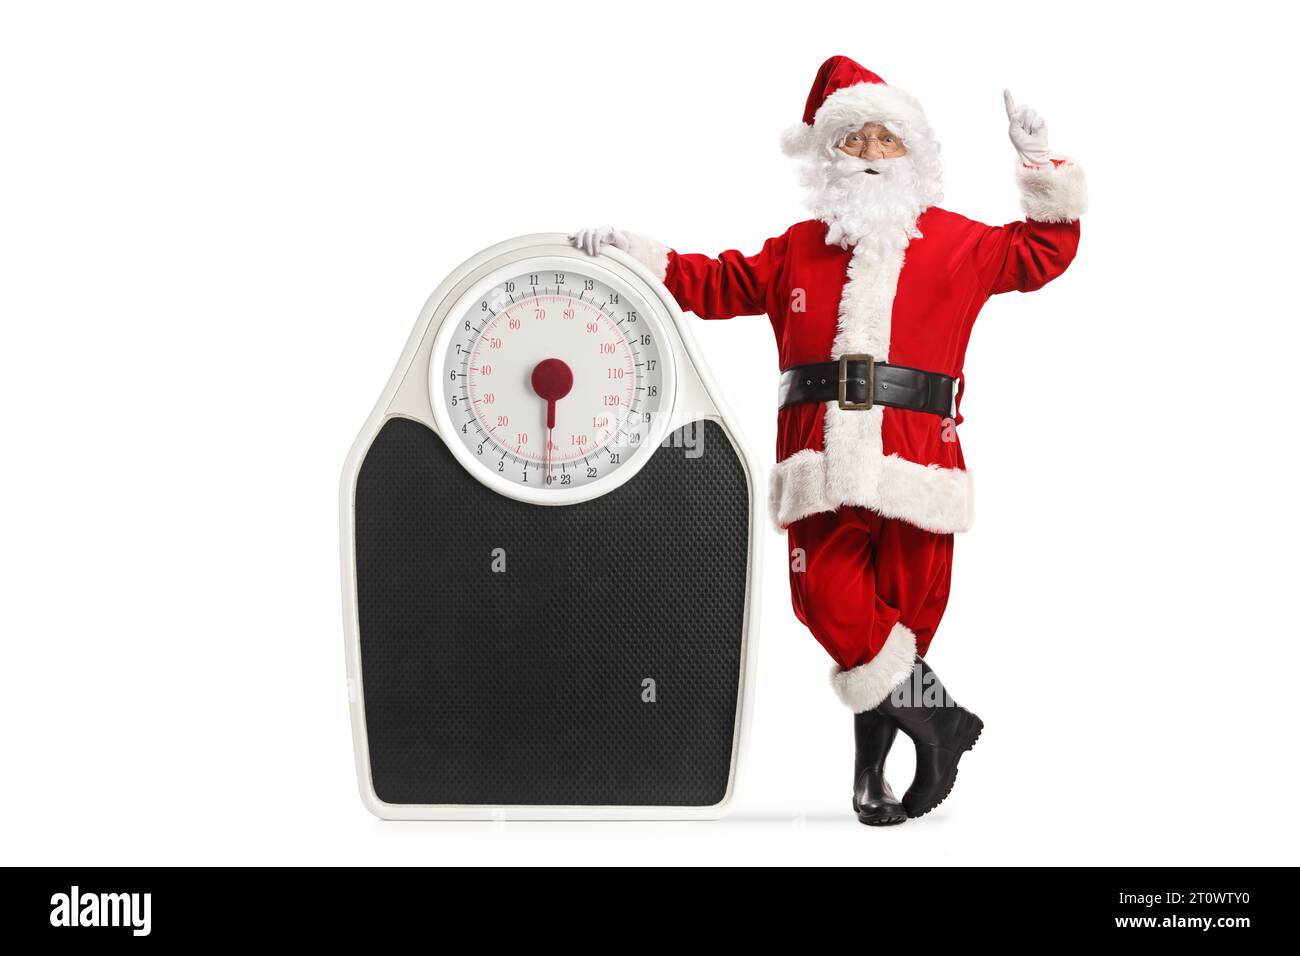 Santa Claus leaning on a big weight scale and pointing up isolated on white background Stock Photo